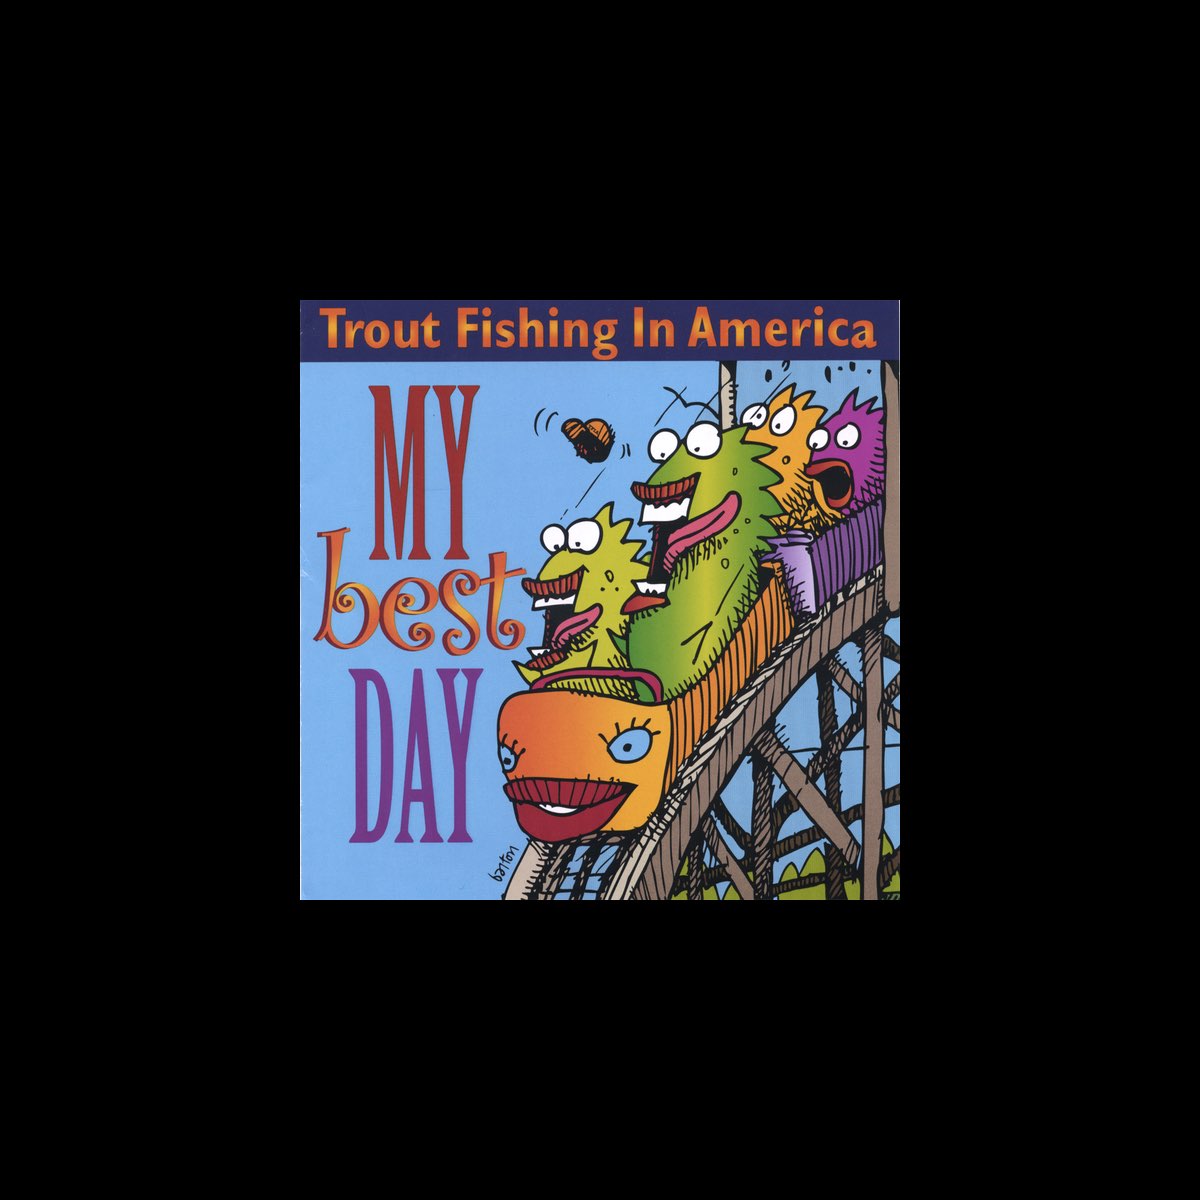 My Best Day - Album by Trout Fishing In America - Apple Music